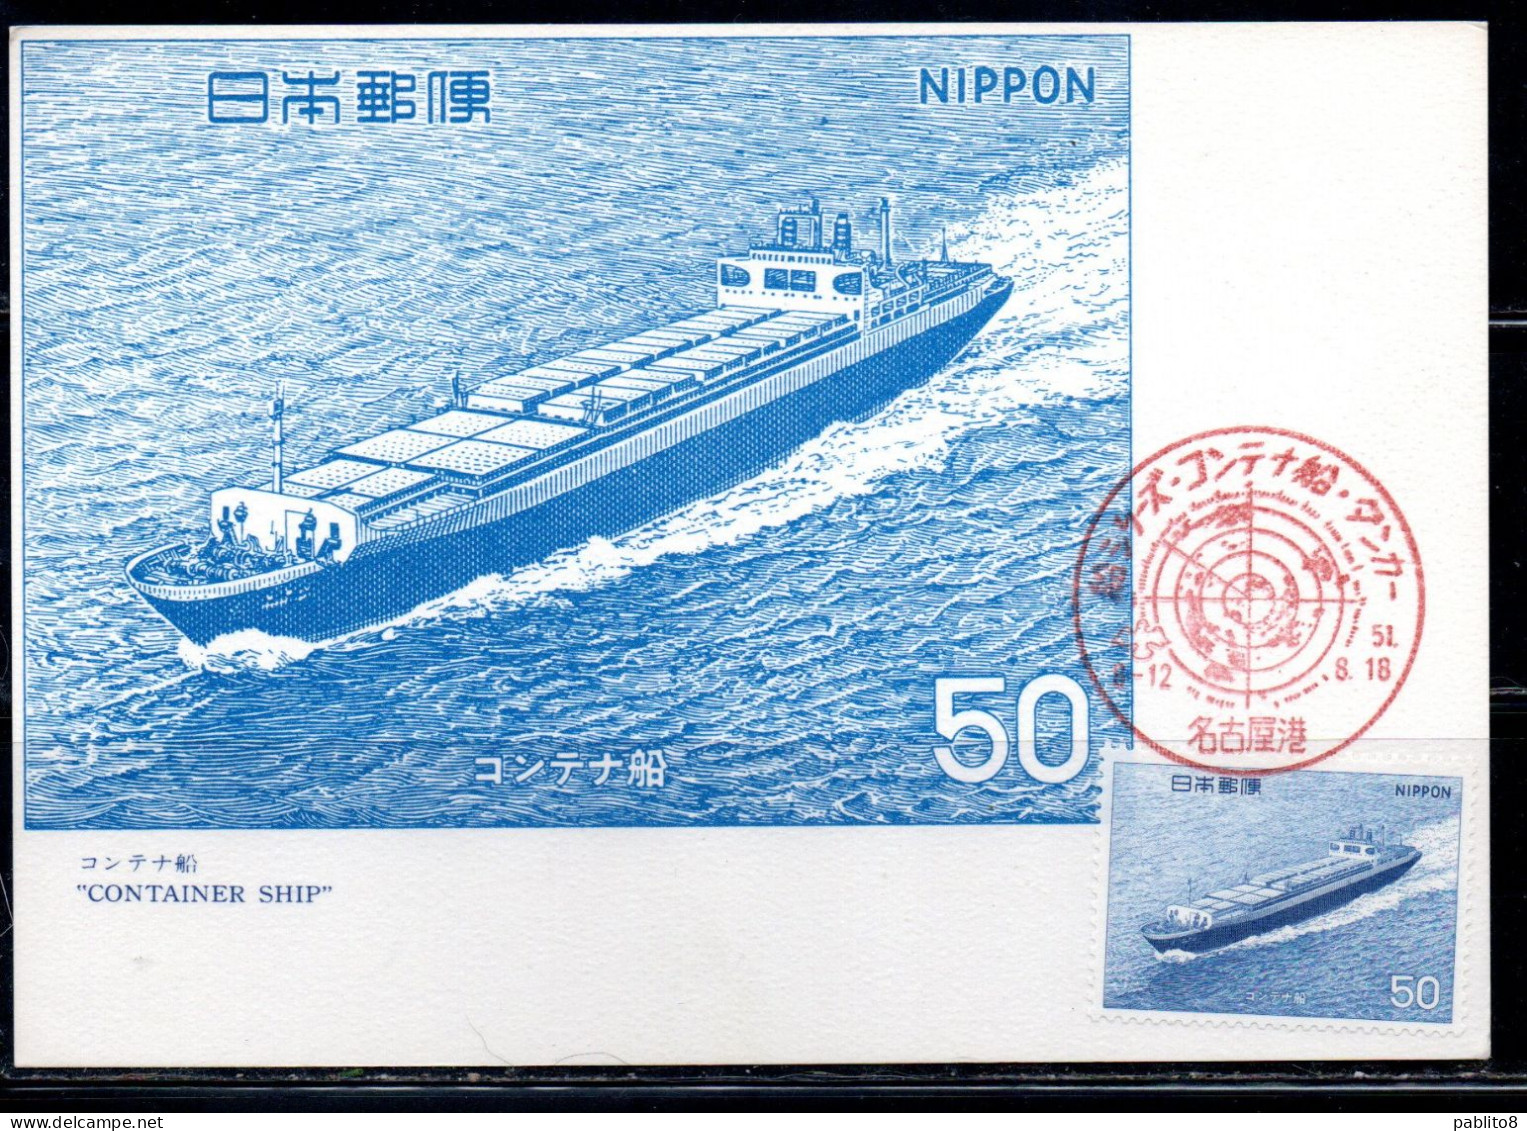 JAPAN GIAPPONE 1975 1976 HISTORIC SHIPS ISSUE CONTAINER SHIP 50y MAXI MAXIMUM CARD - Maximum Cards